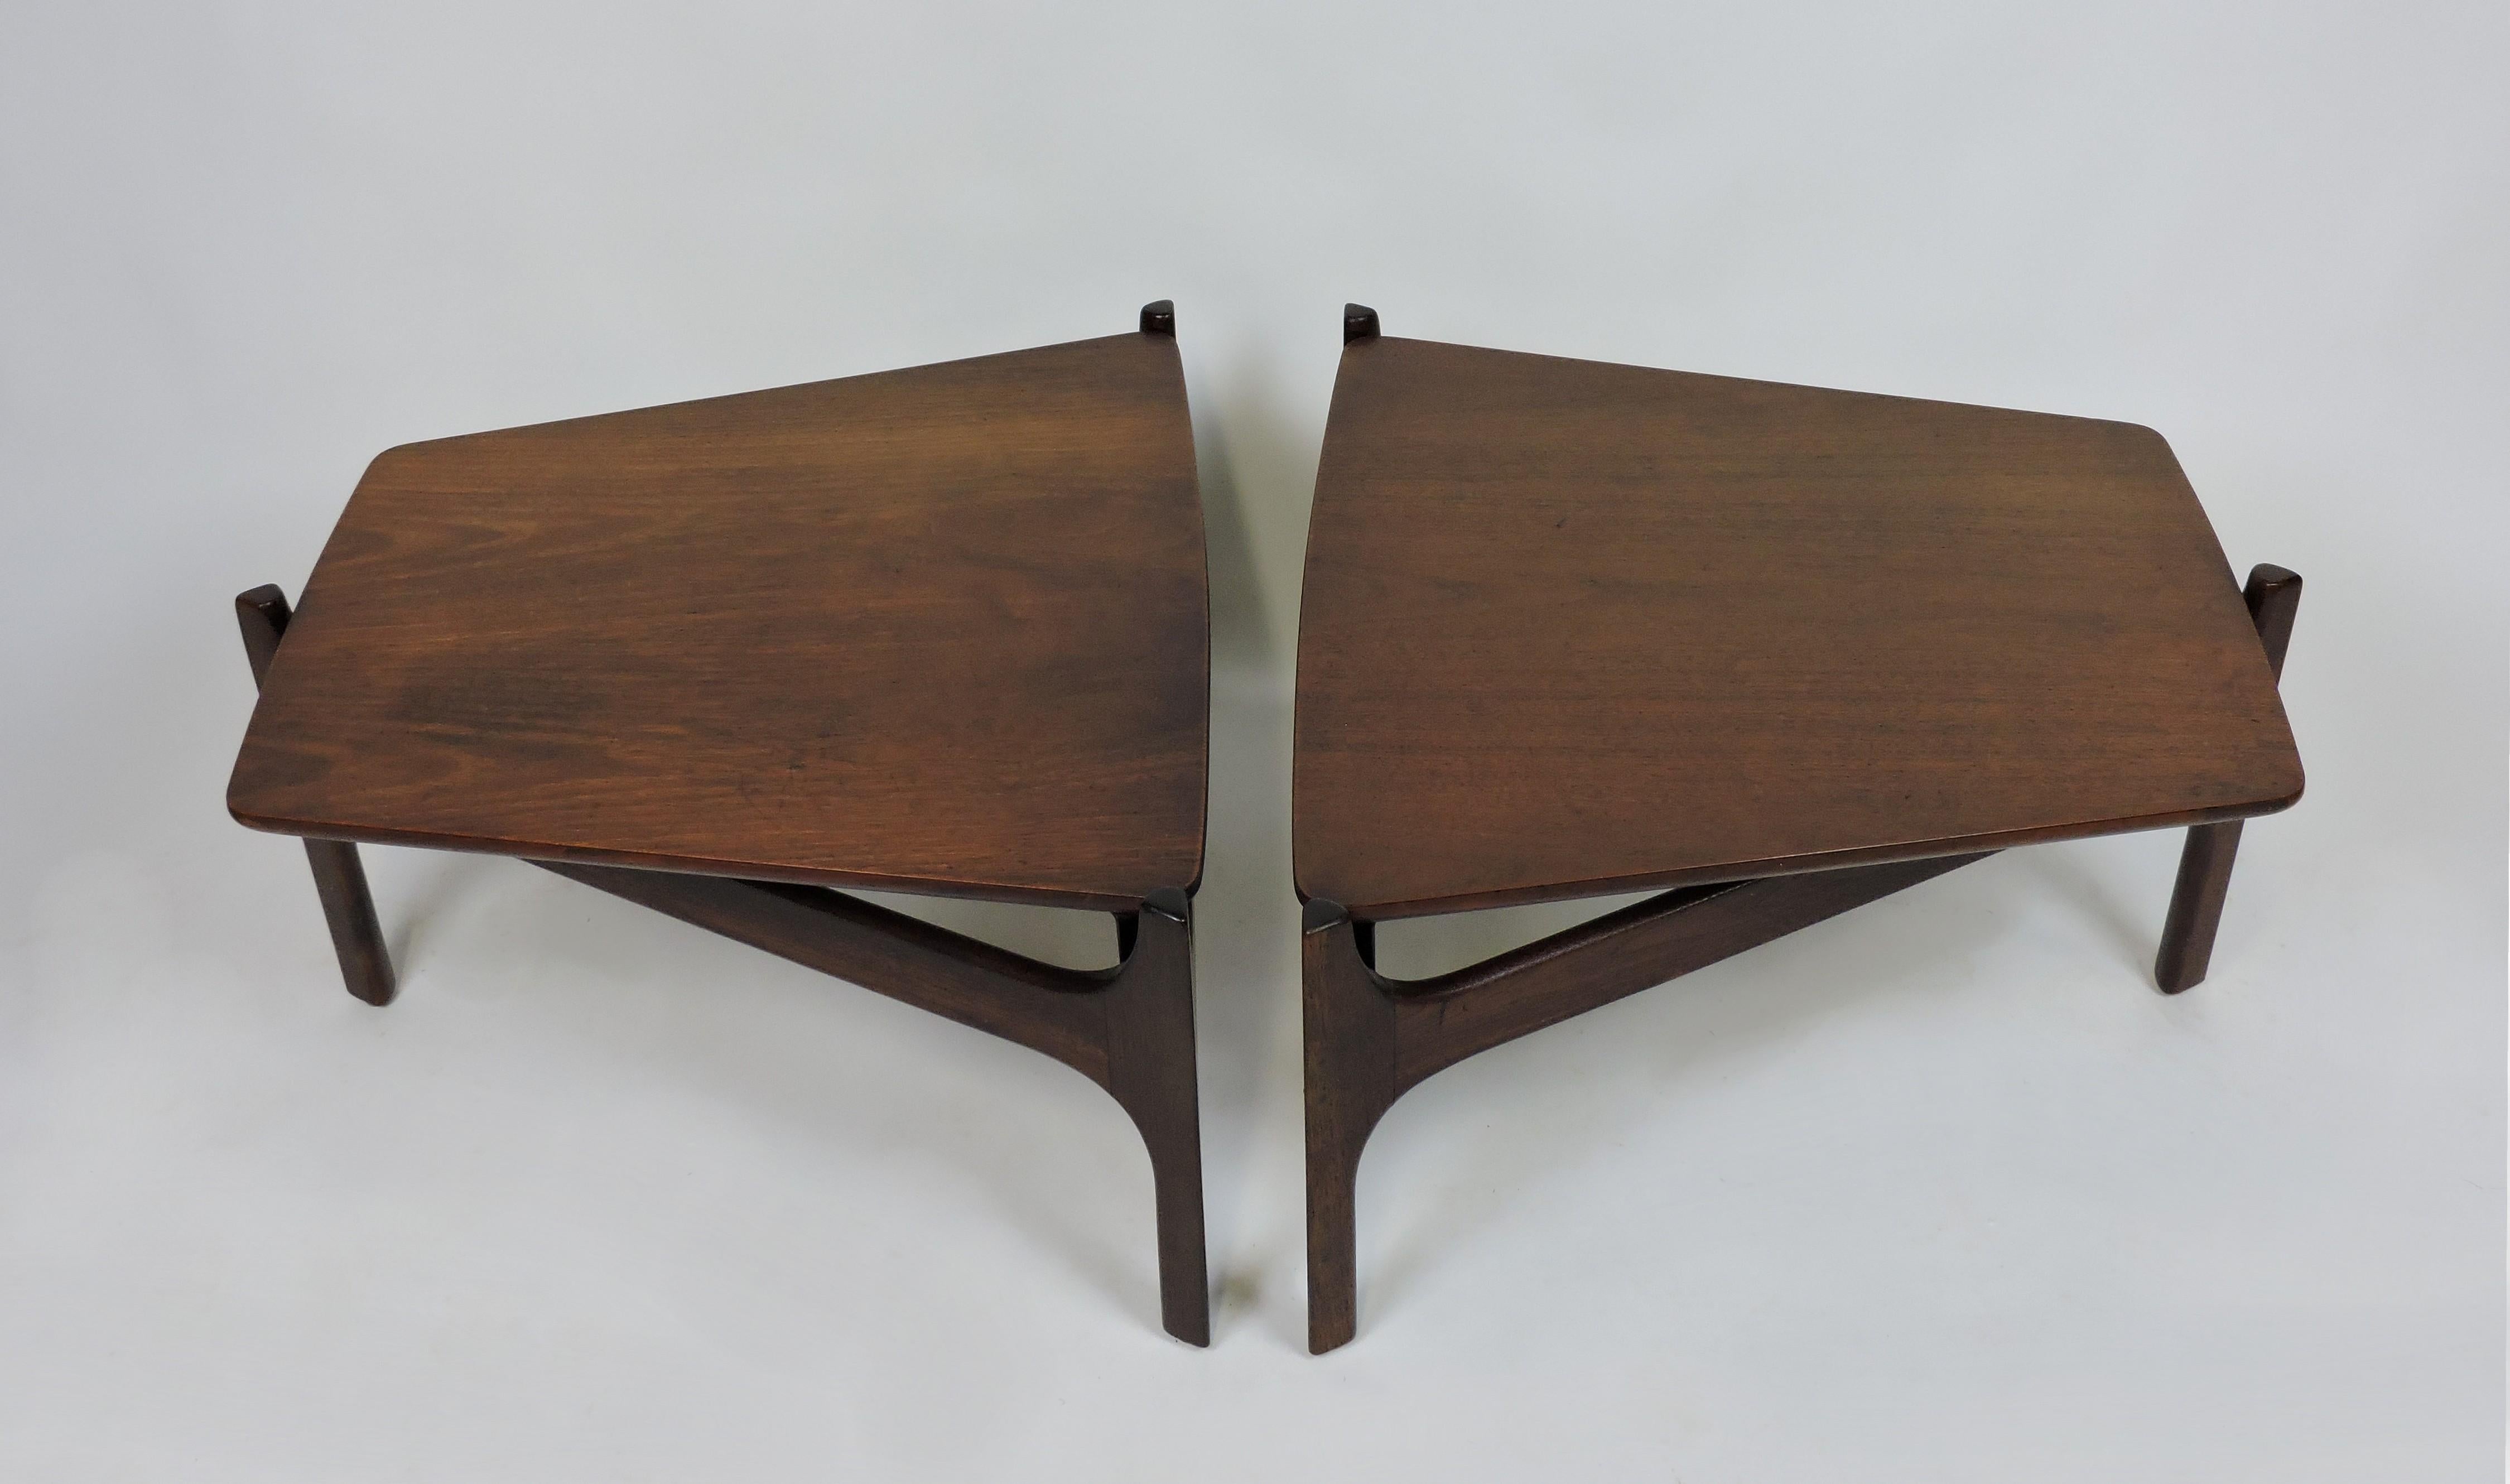 Pair of very cool and rare tables designed by John Keal for Brown Saltman. These tables have a floating trapezoid shaped top that rests on a sculpted solid walnut base with three legs. Originally designed as a modular unit to attach to matching